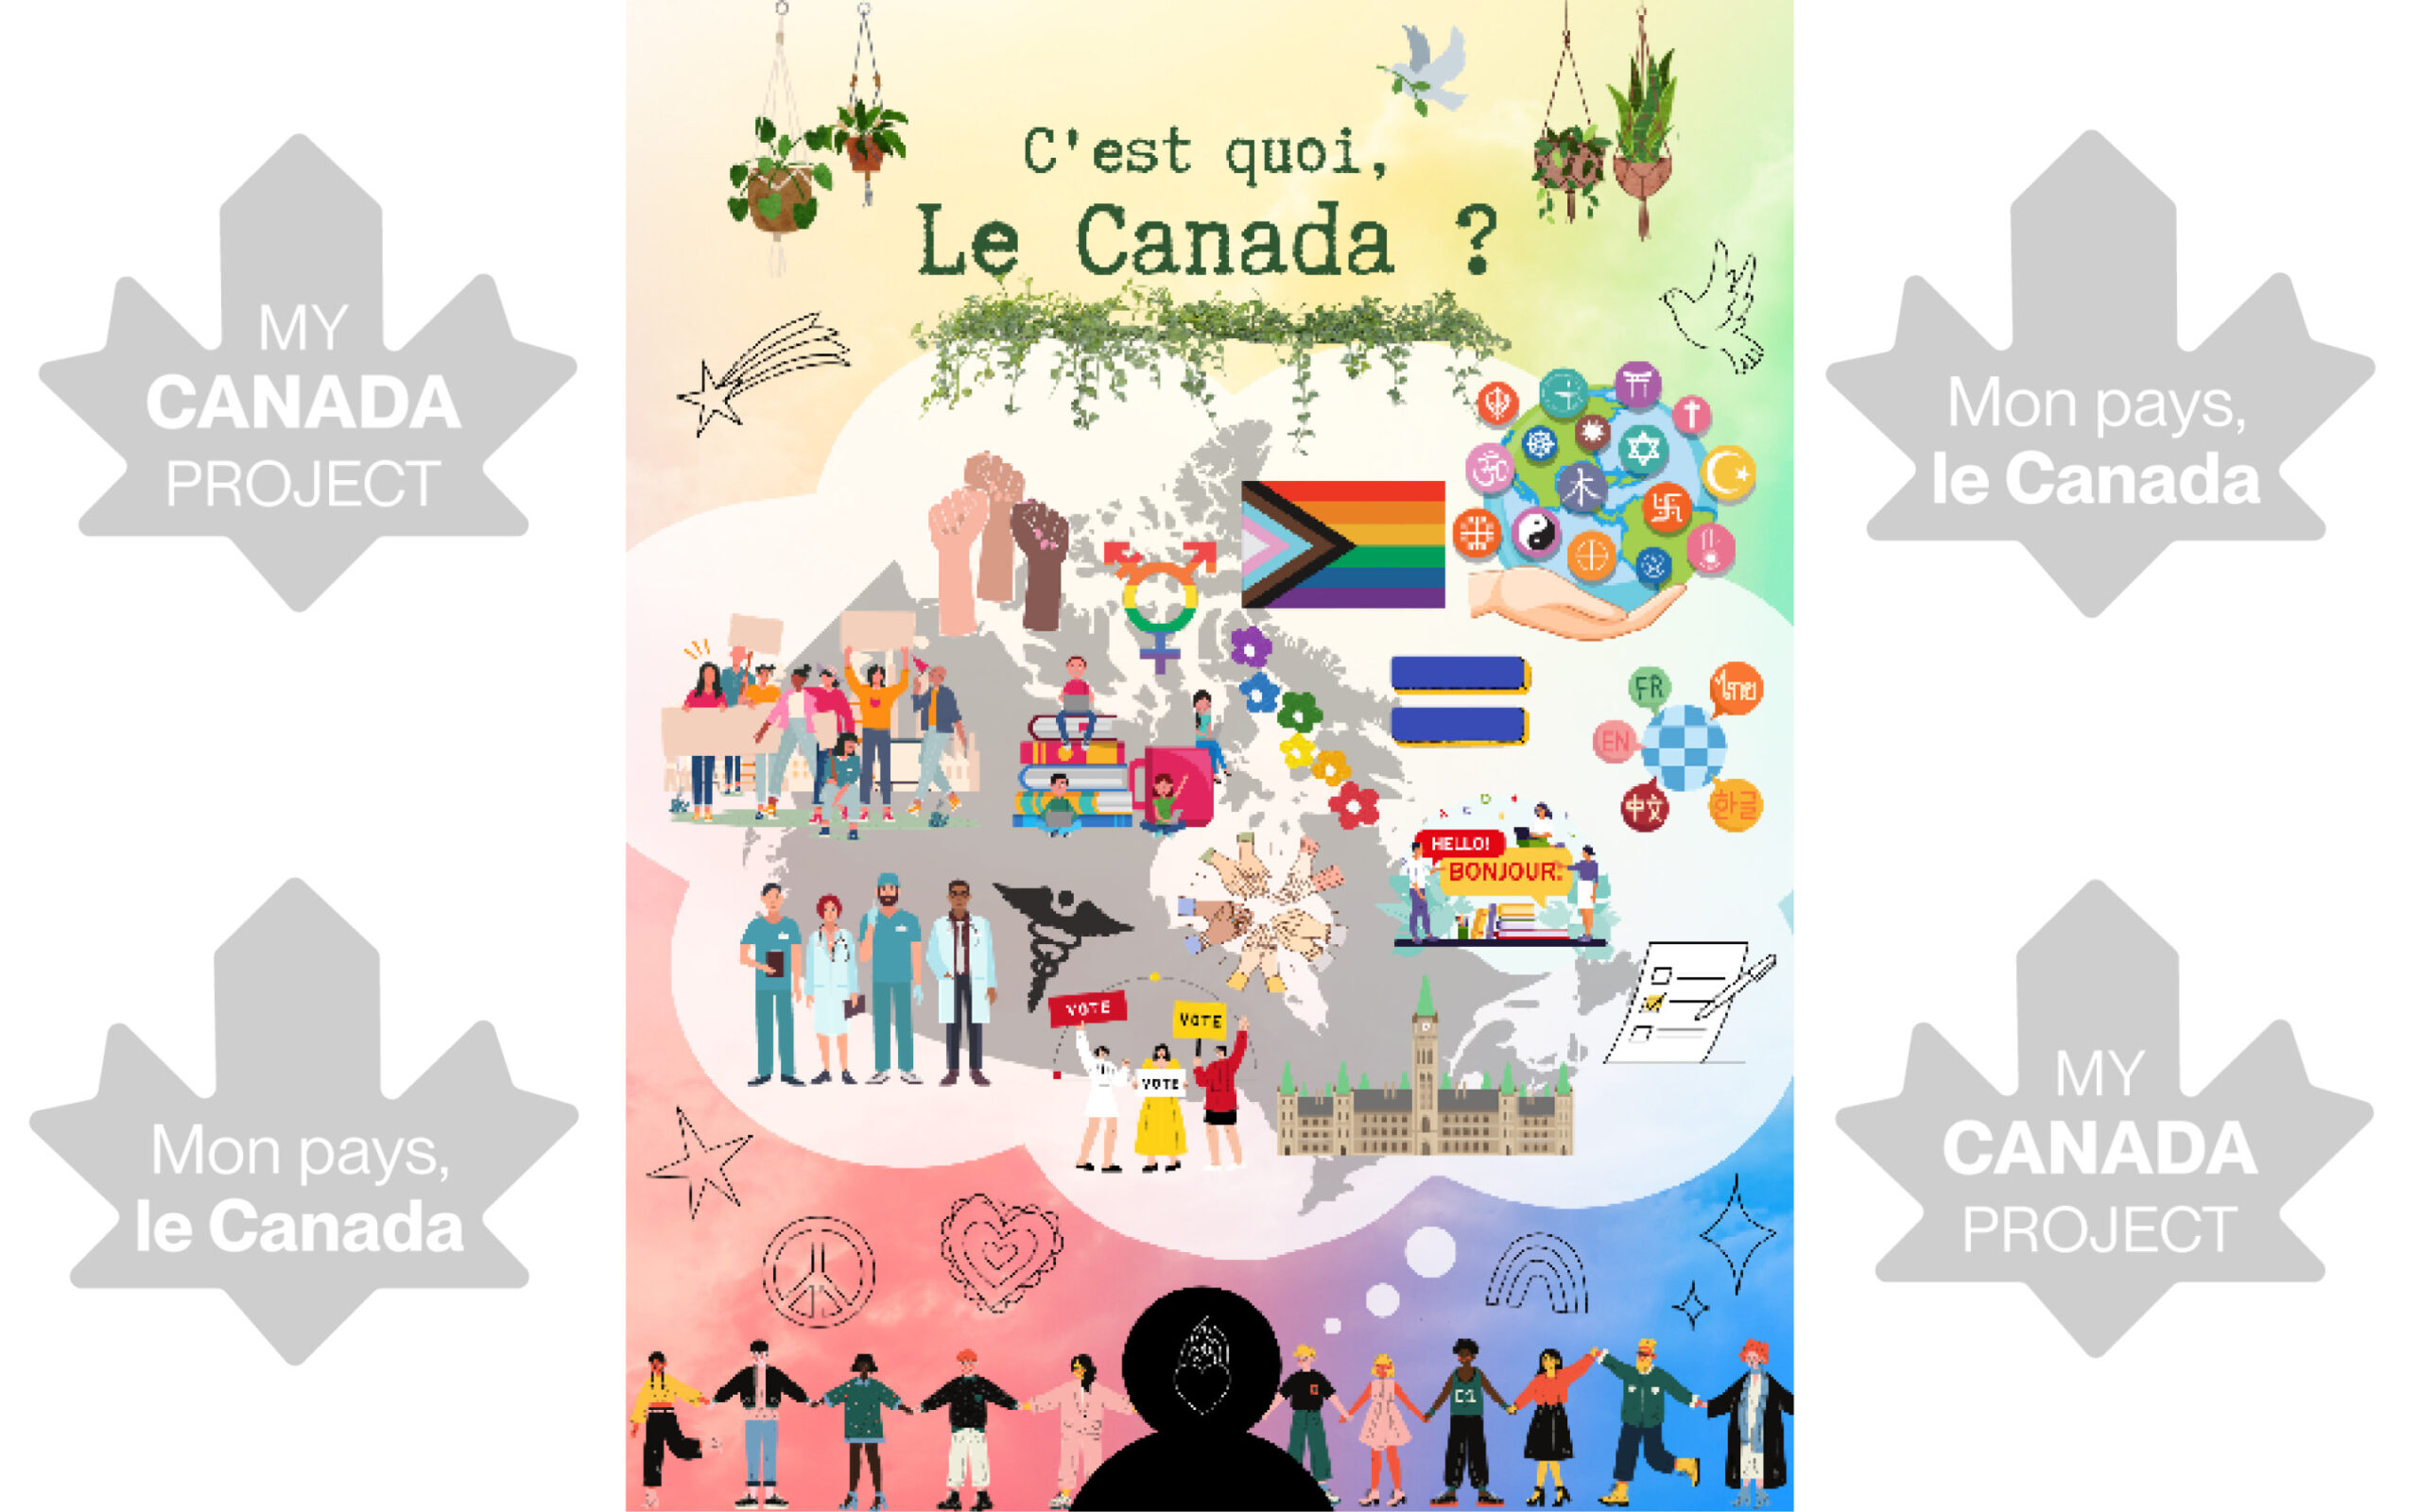 A piece of digital art with a rainbow-pastel background. There is a greyscale map of Canada in the center of the image. Pasted over and all around the map of Canada, there are cartoon representations of diversity, education, democracy, religious freedom, freedom of identity, and people from various walks of life coming together.